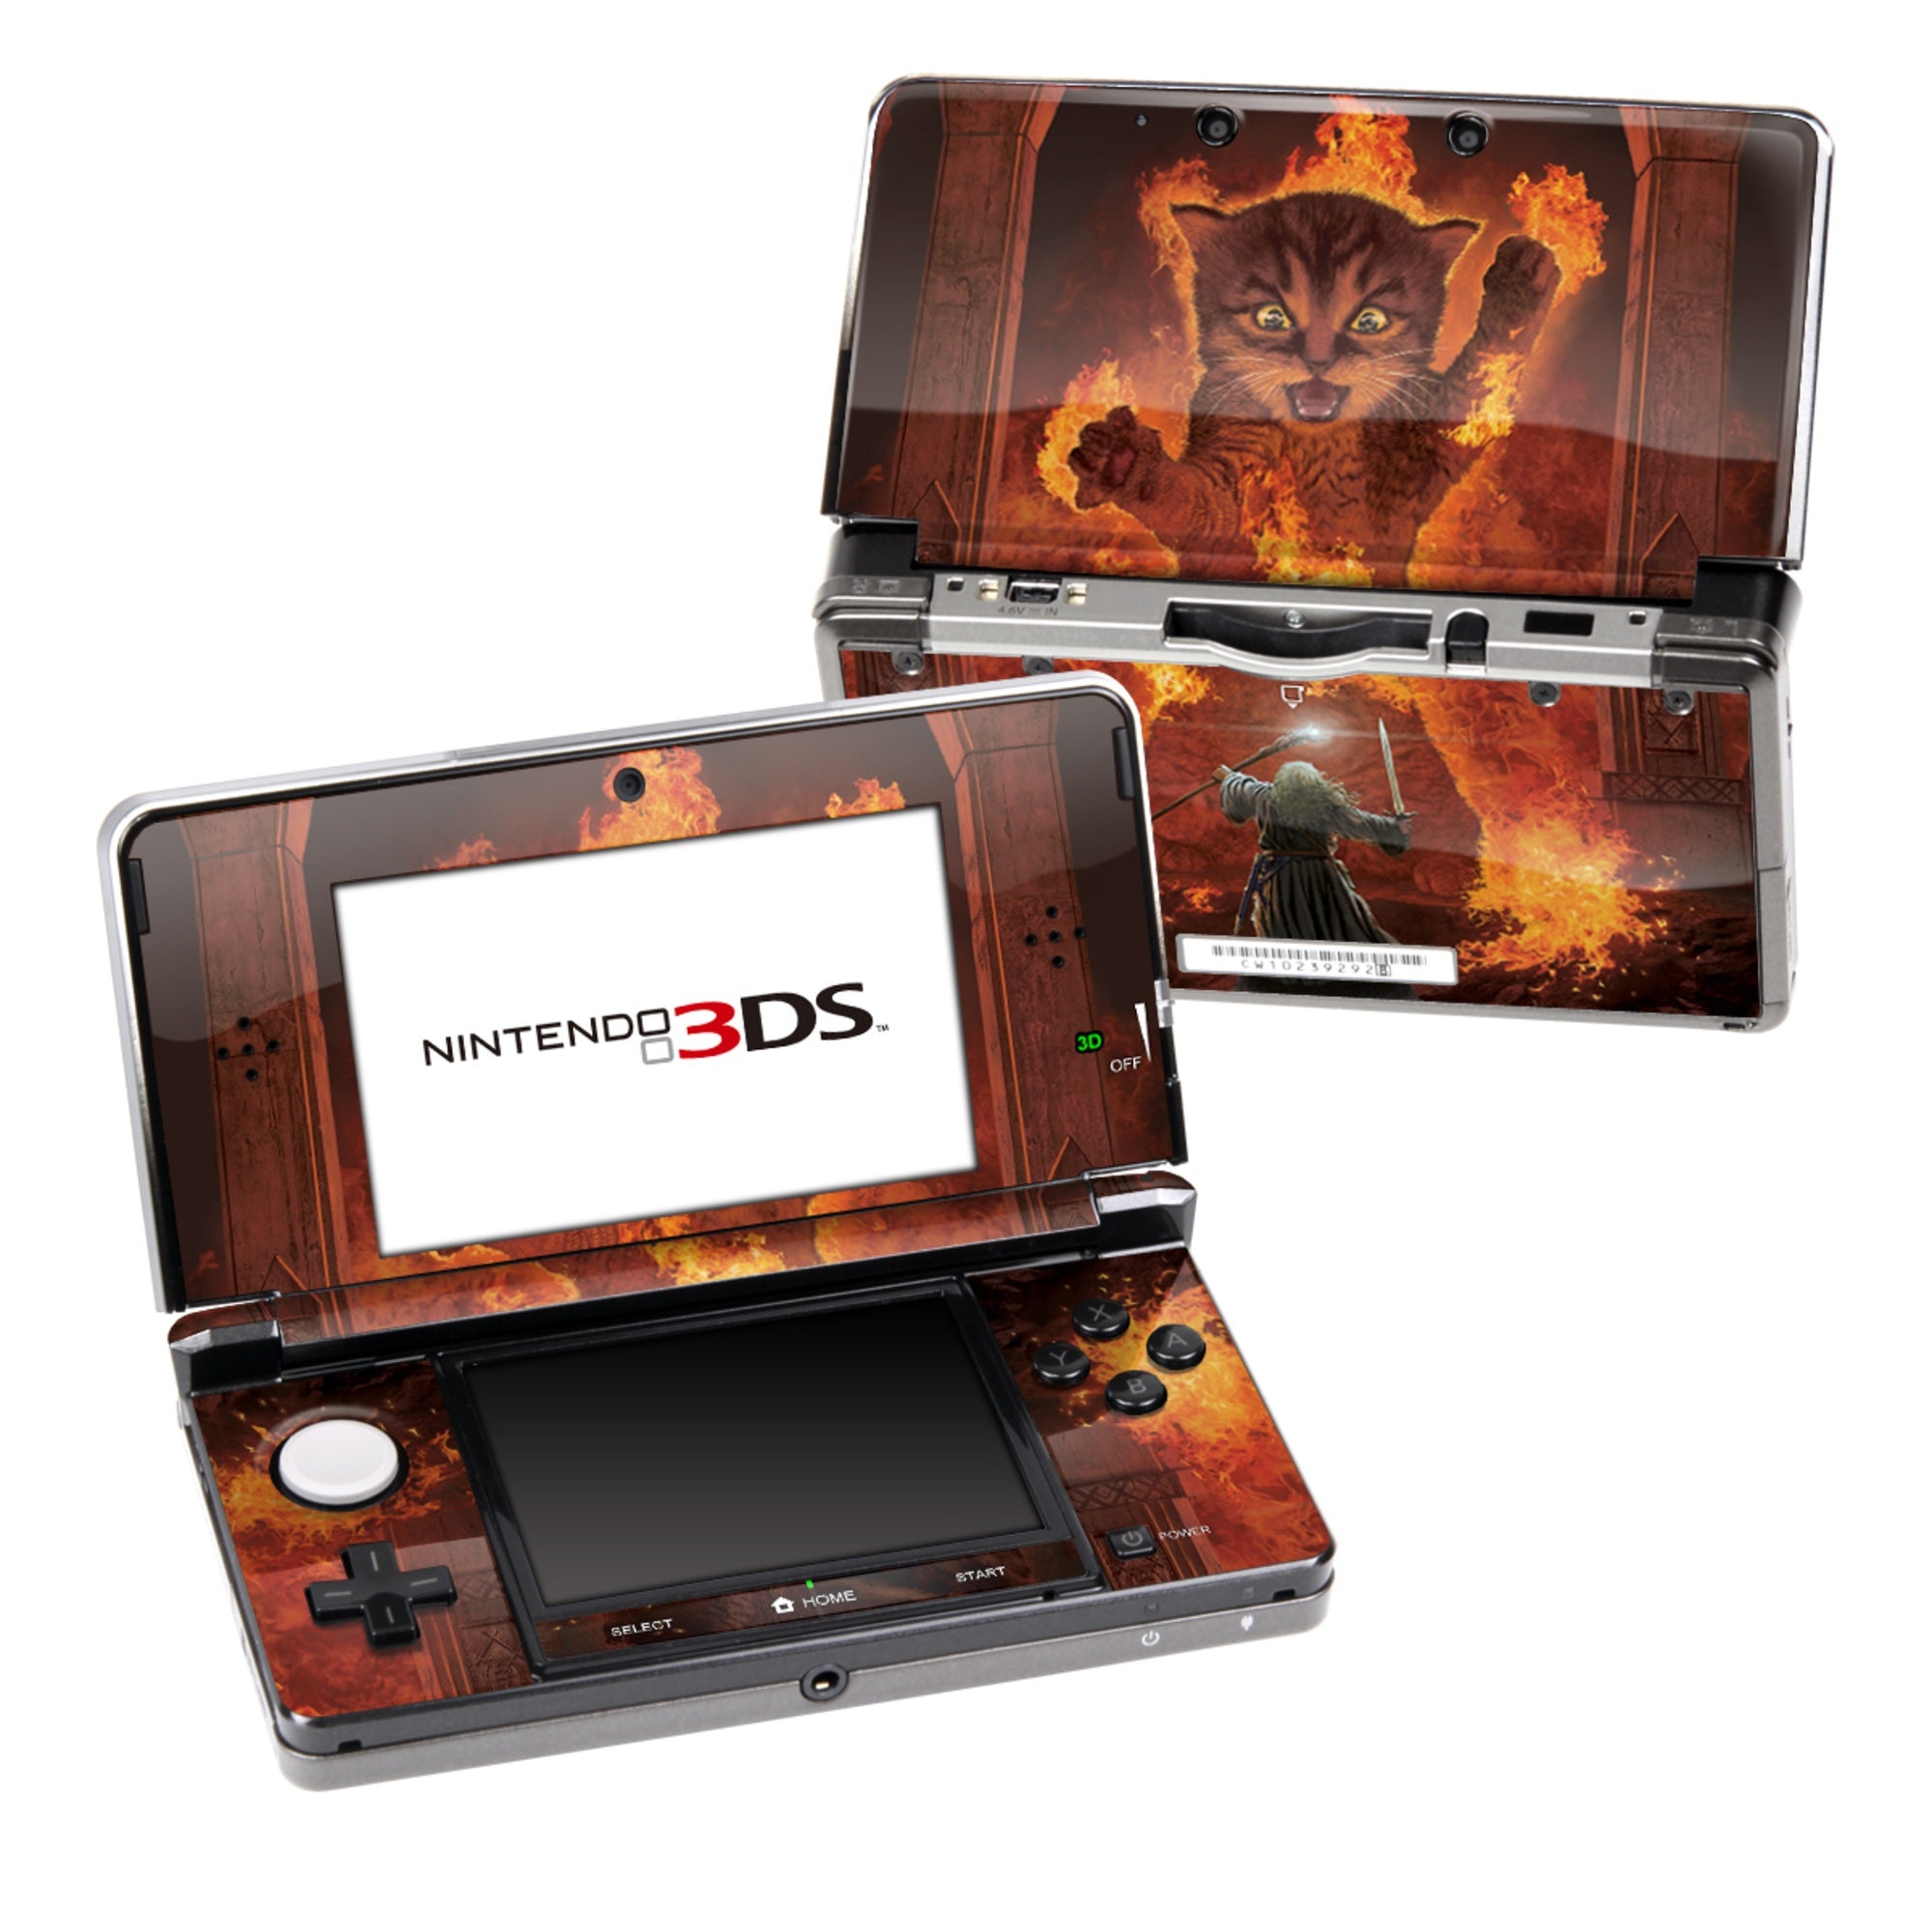 You Shall Not Pass - Nintendo 3DS Skin